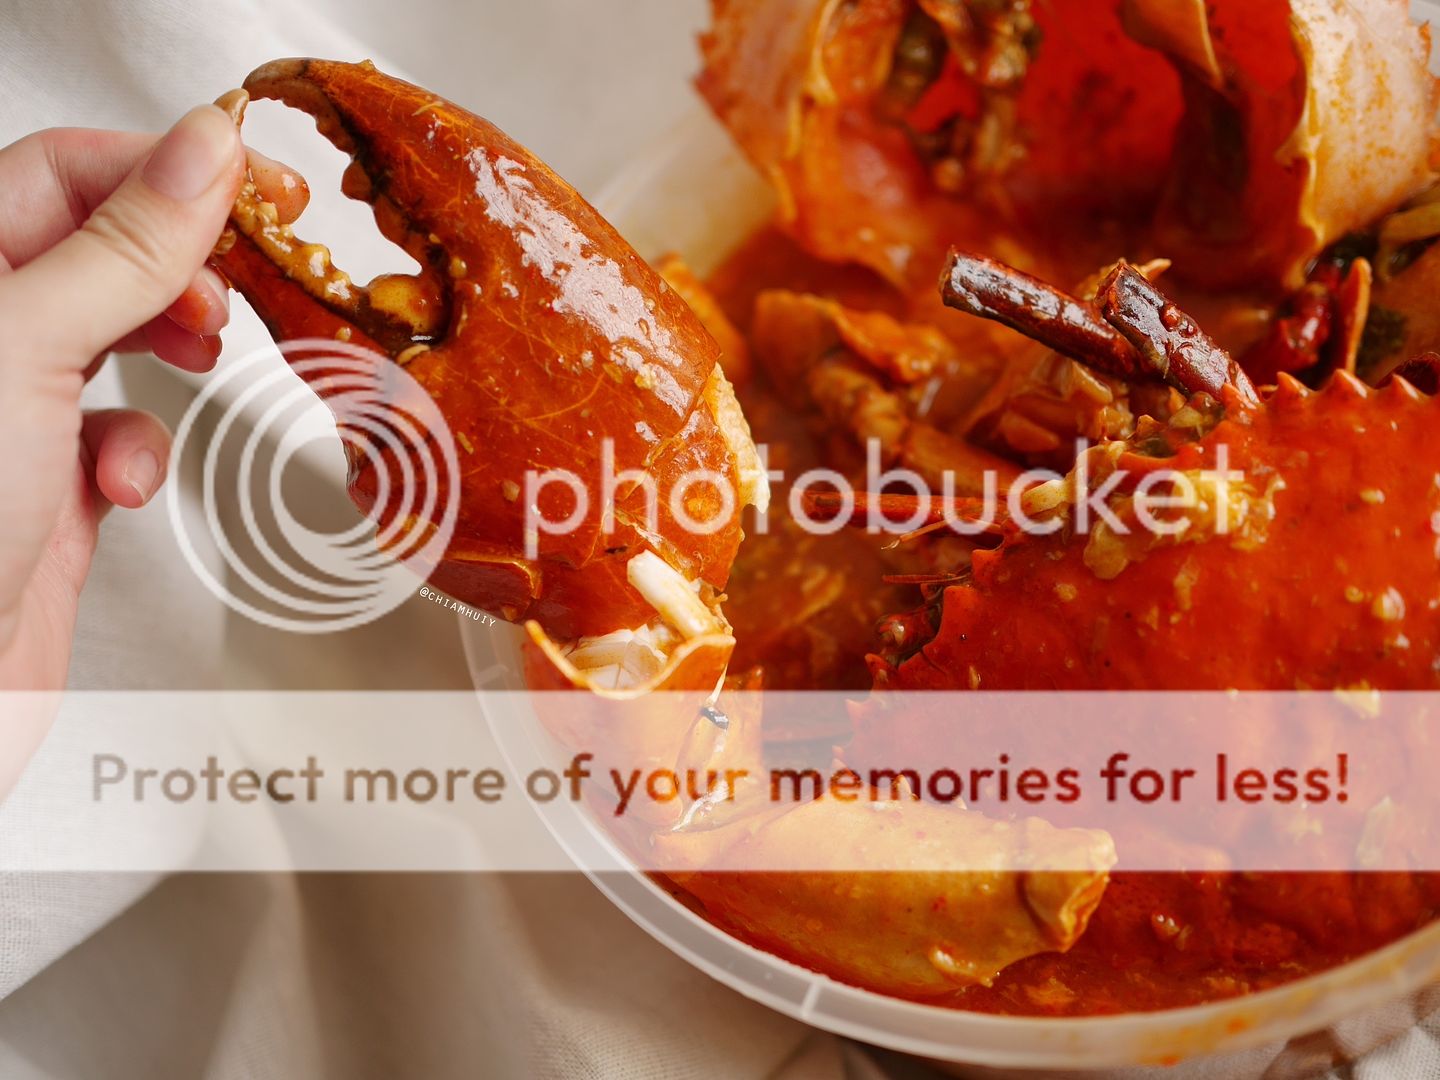  photo 8crabs Chilli Crab delivery03.jpg